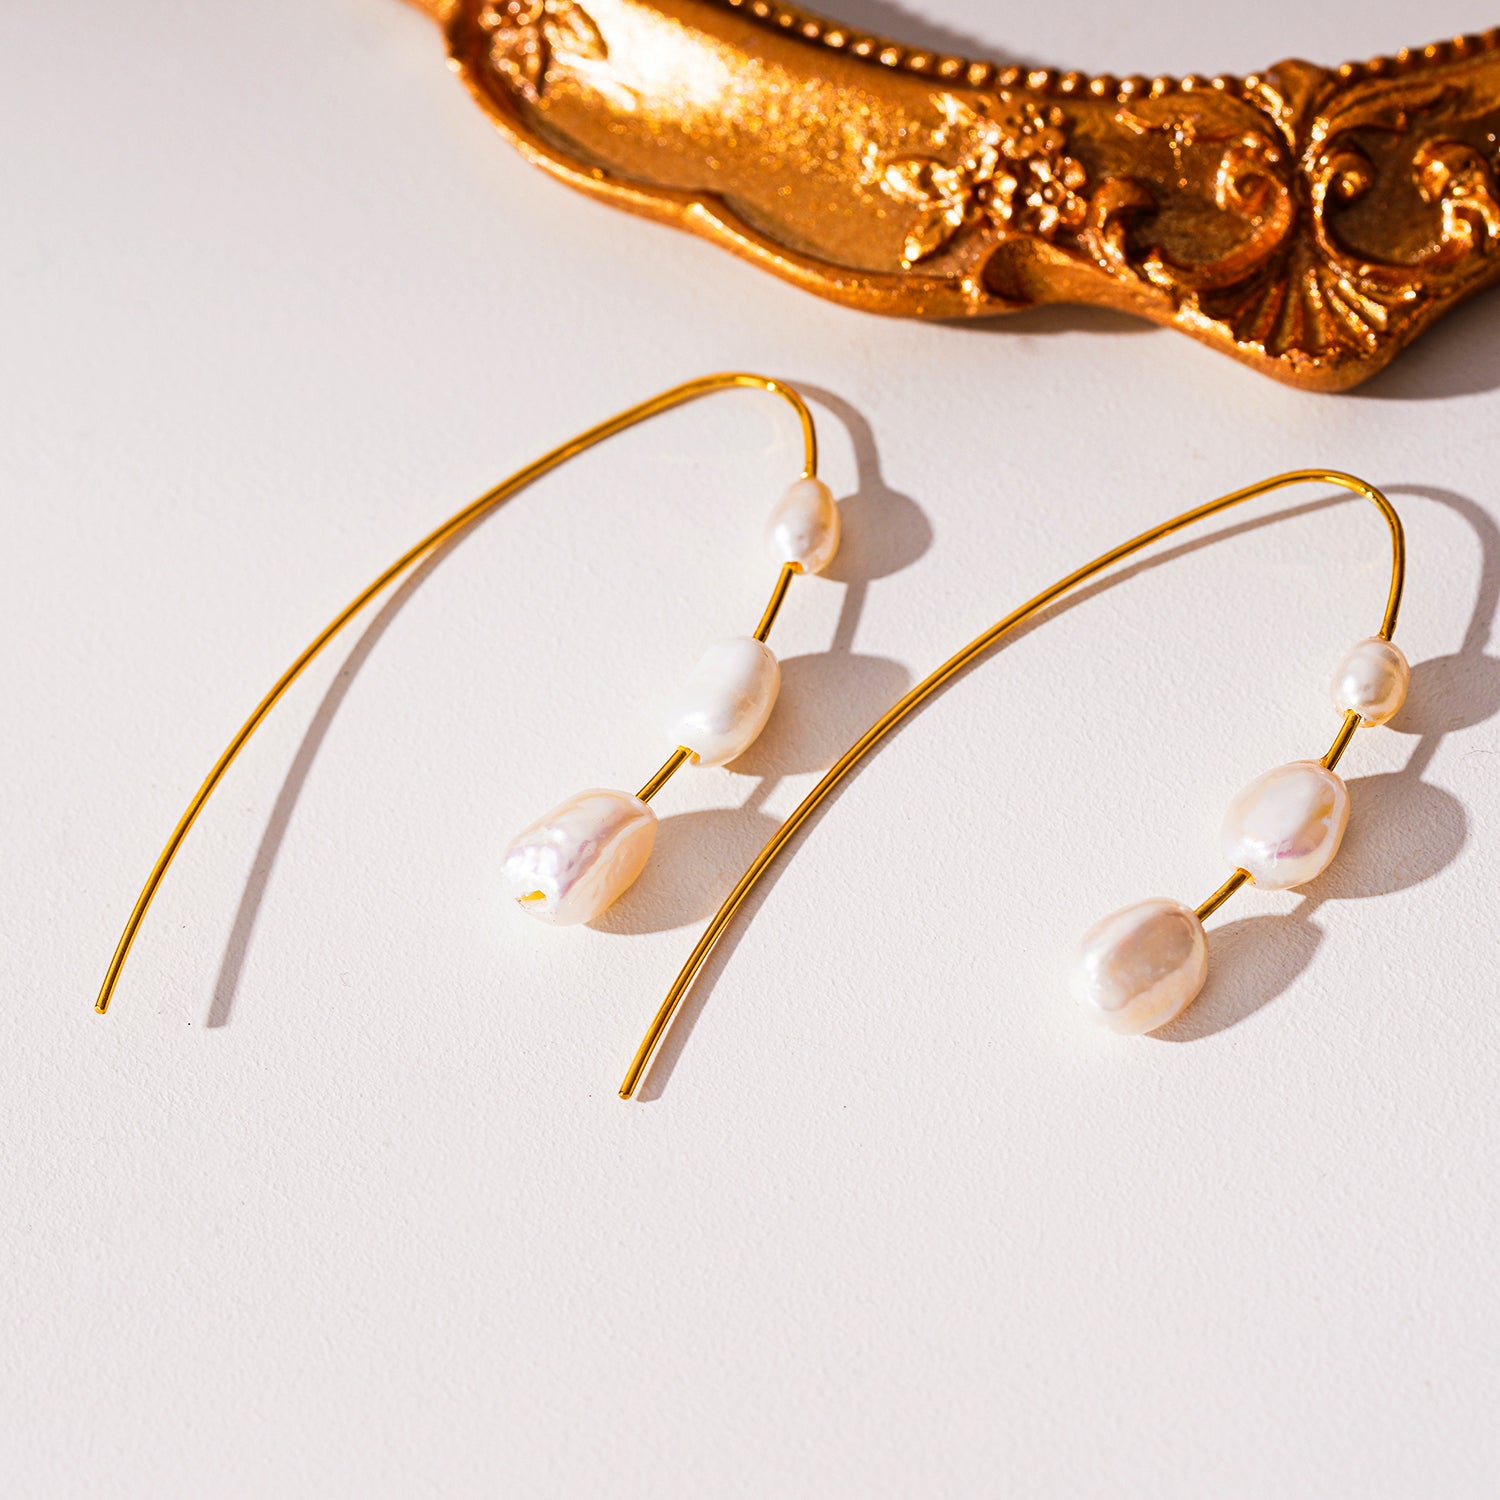 Style LISANNE 0985: Geometric Shaped Modernist Hoop Earring with a Trio of Fresh-Water Pearls.